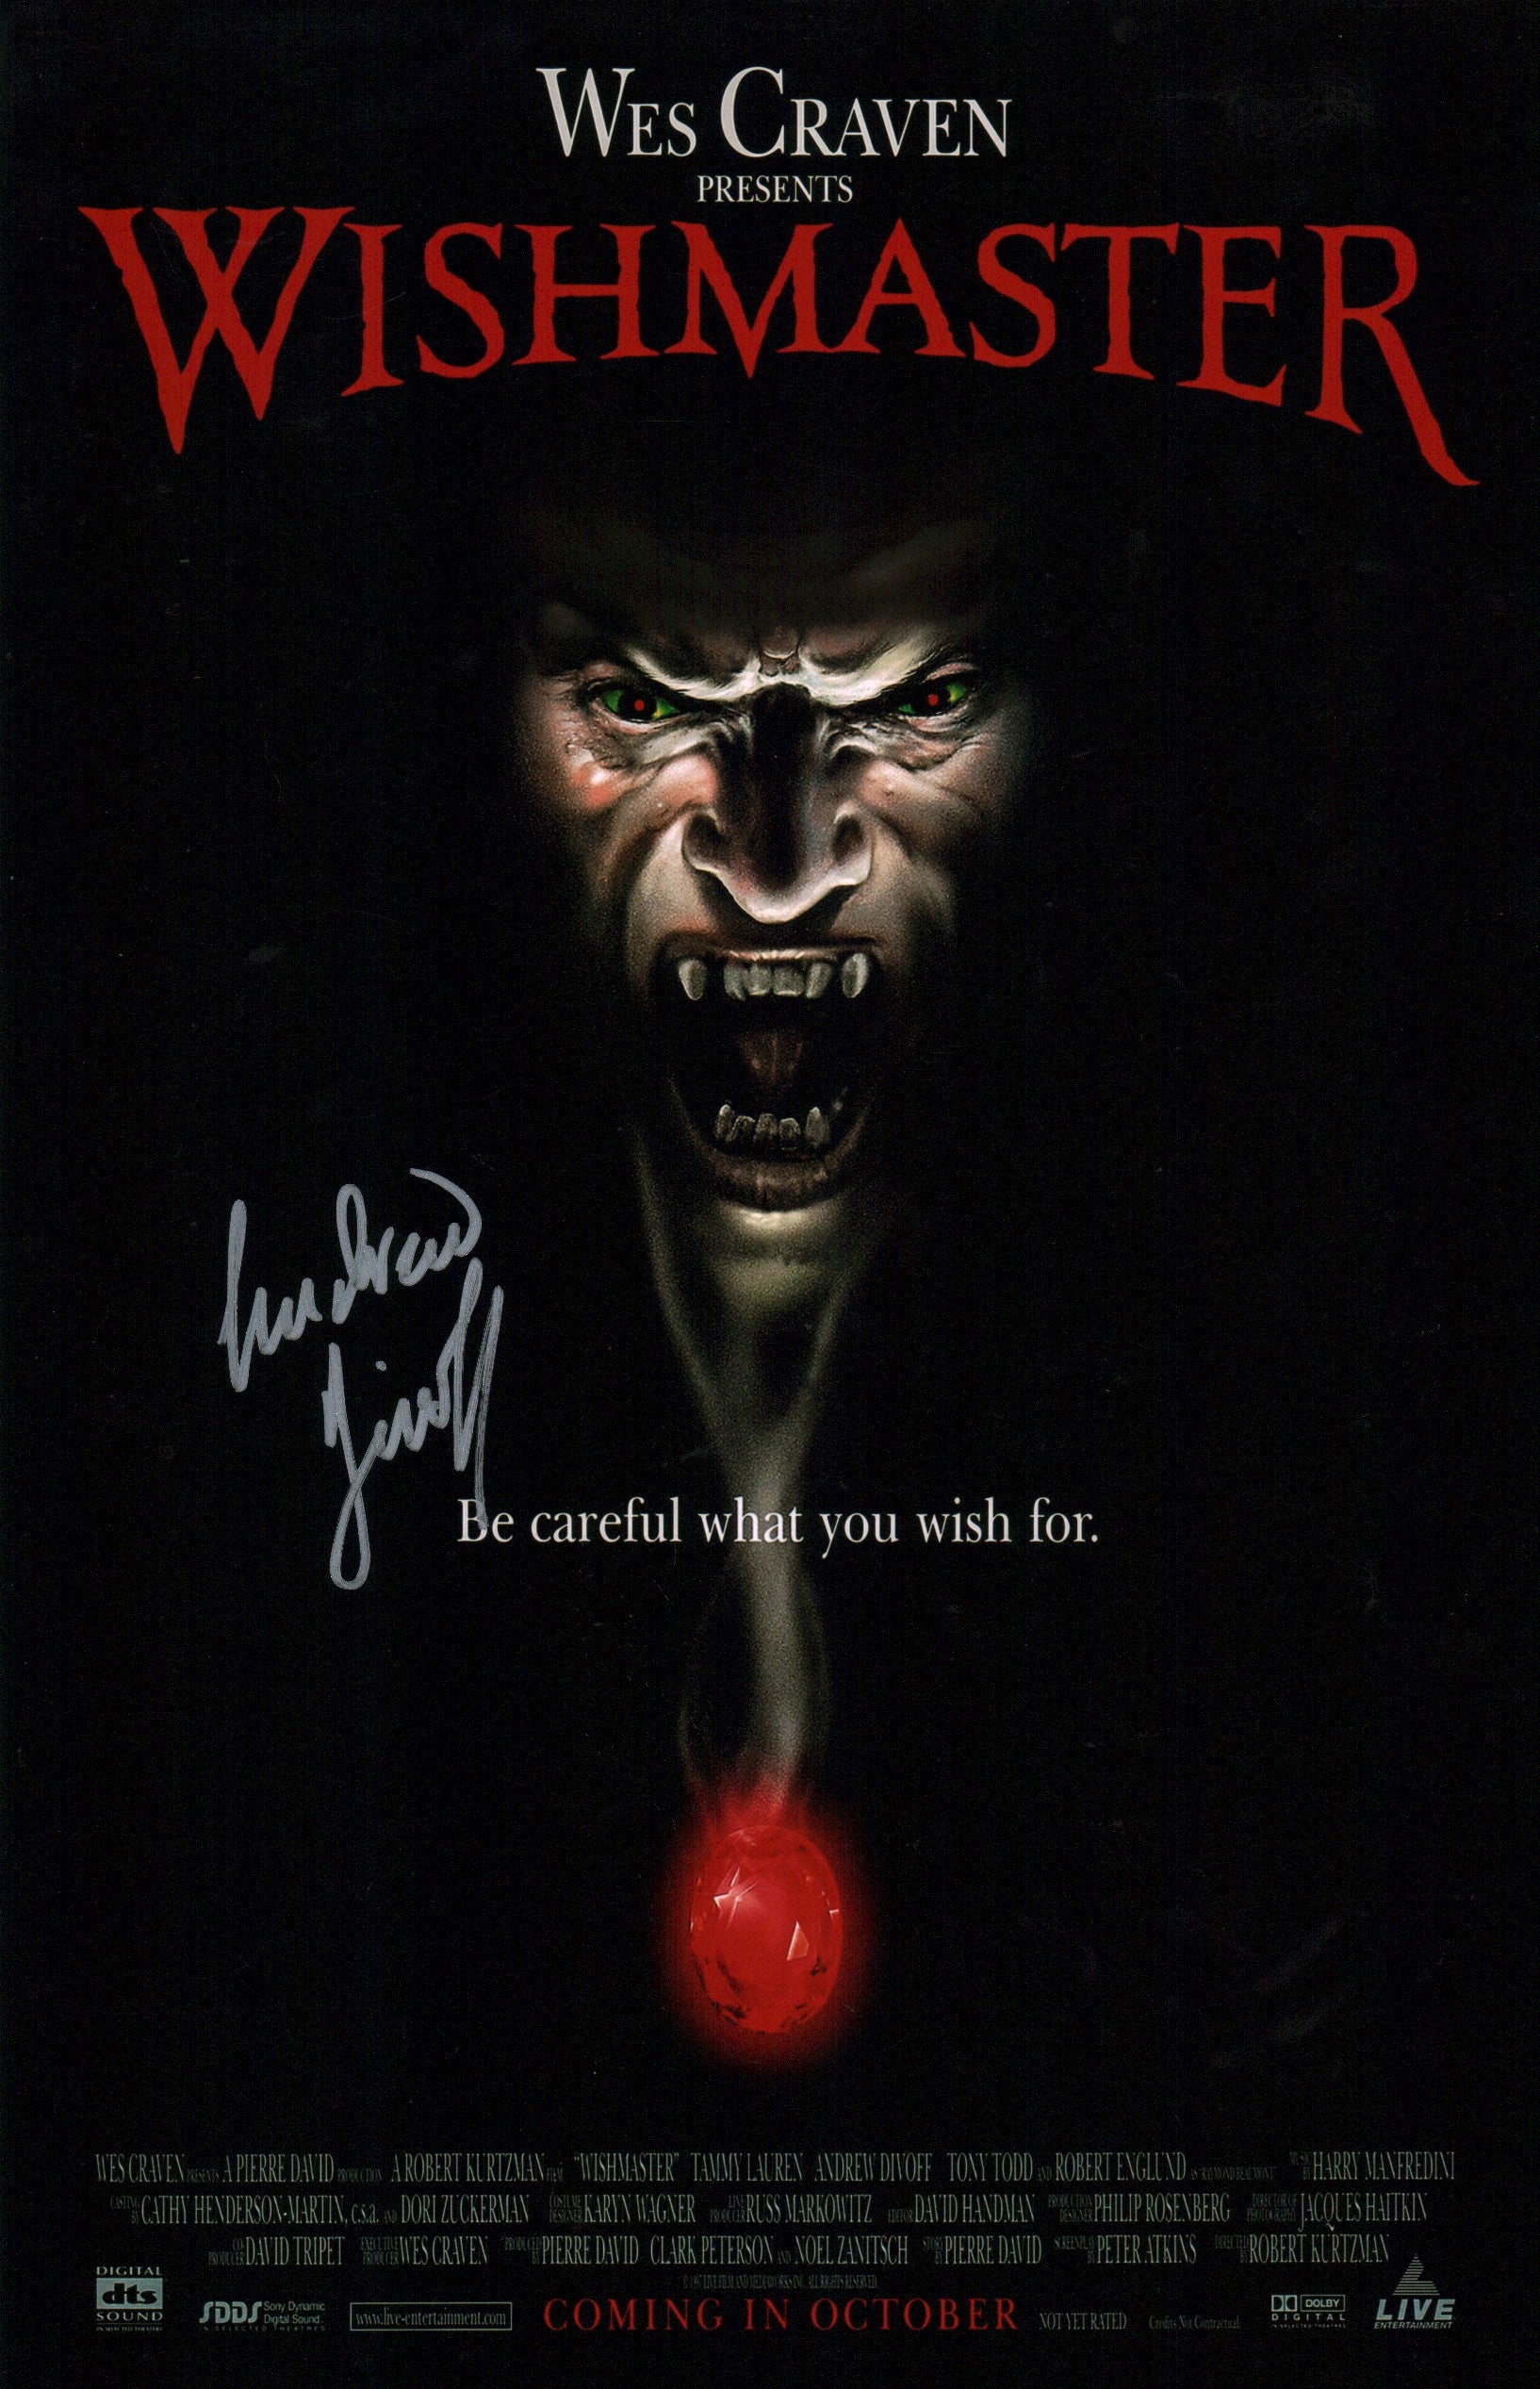 Andrew Divoff Wishmaster 11x17 Signed MINI Poster JSA Certified Autograph